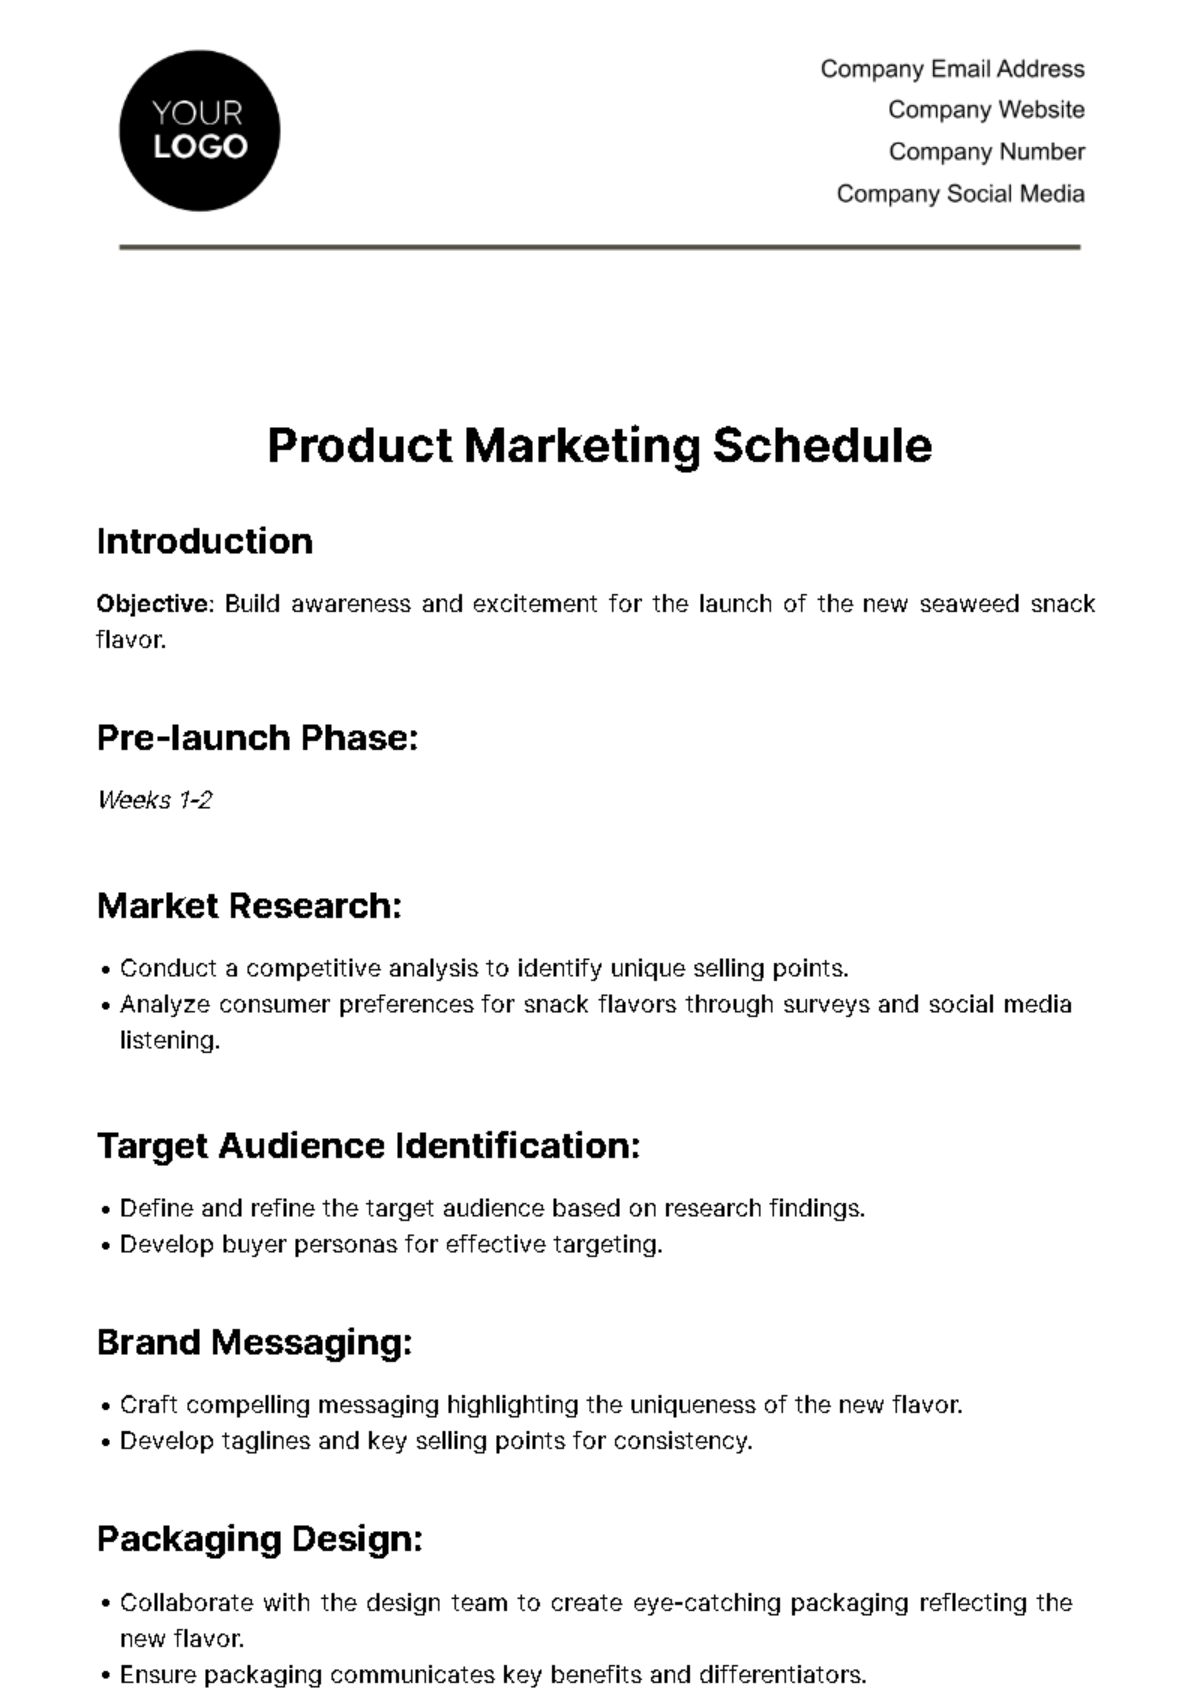 Product Marketing Schedule Template